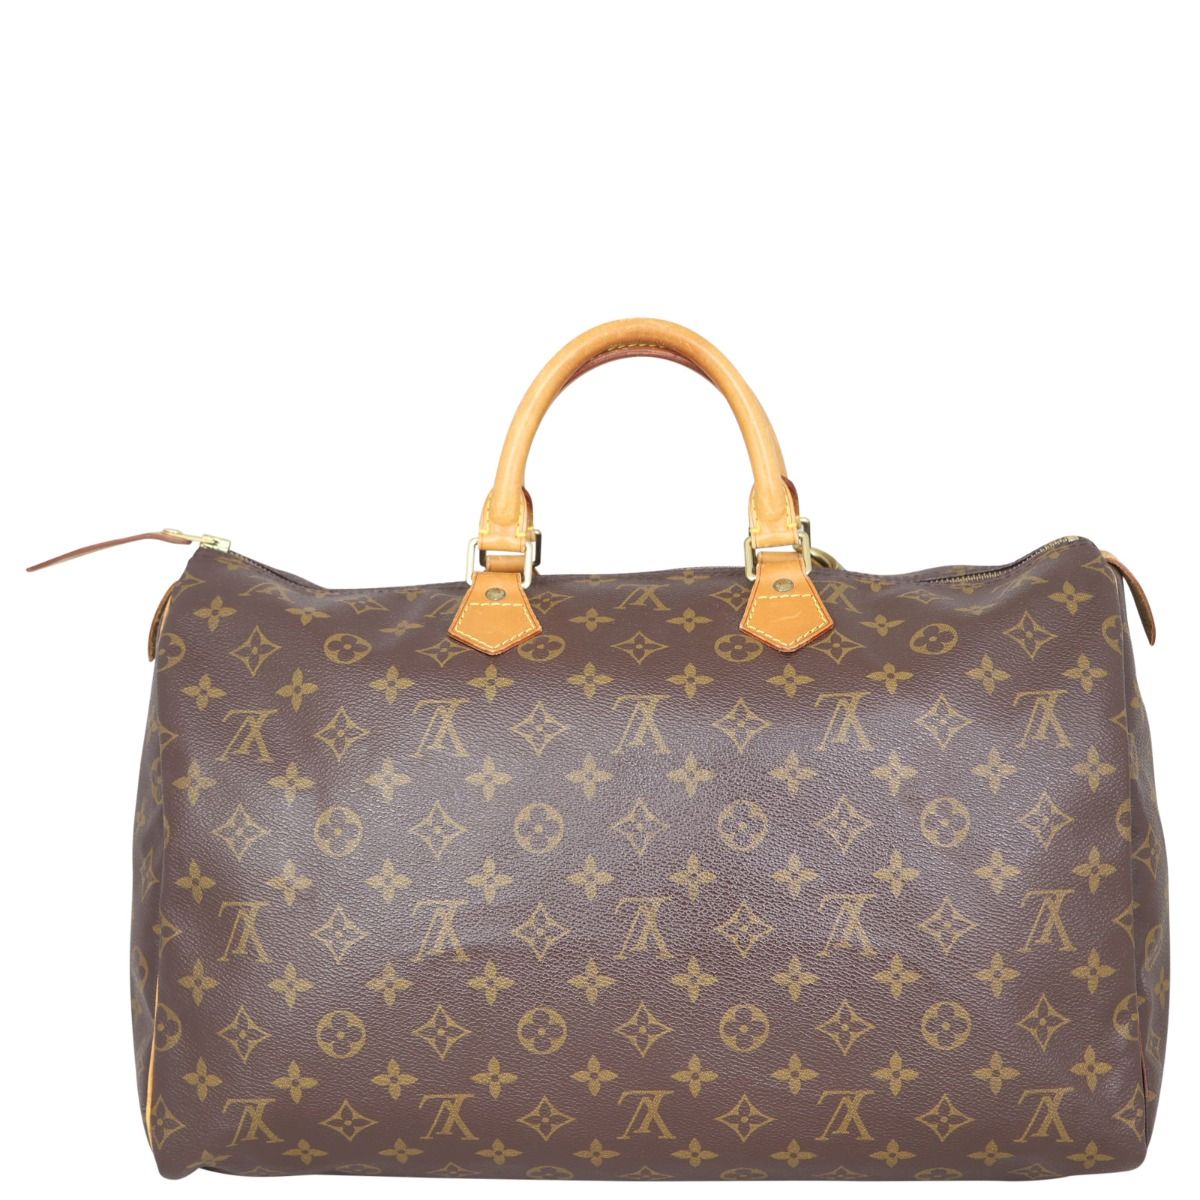 Speedy 40 Satchel Authentic PreOwned  The Lady Bag